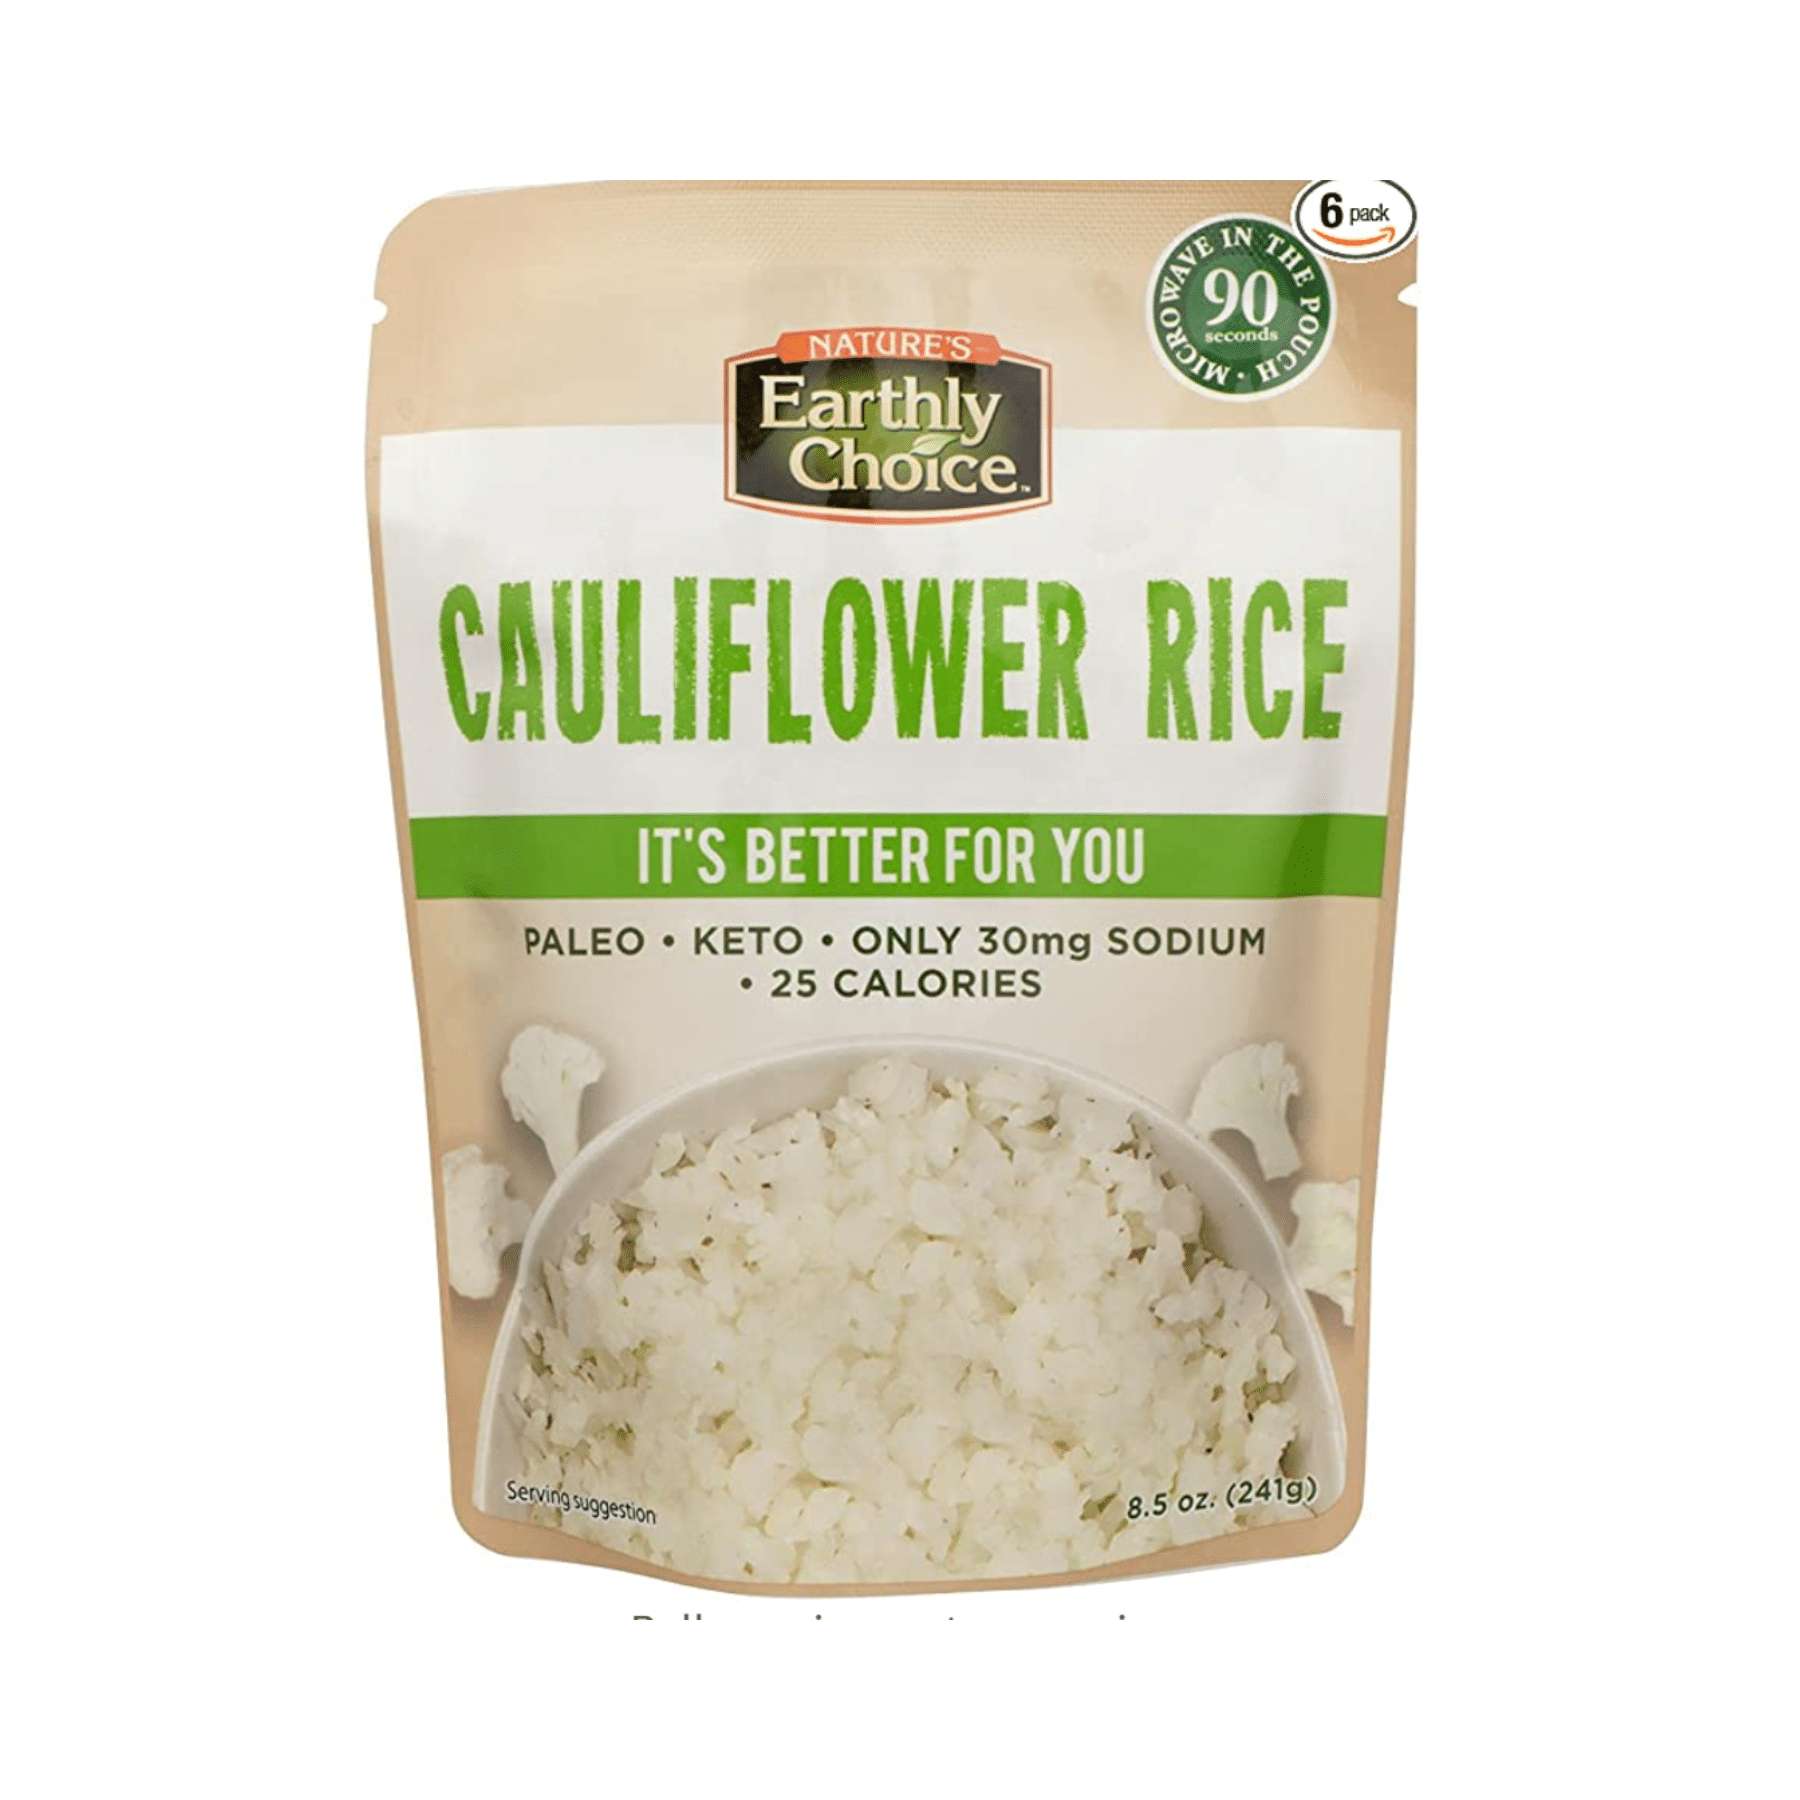 cauliflower rice is an ingredient for a low carb burrito bowl